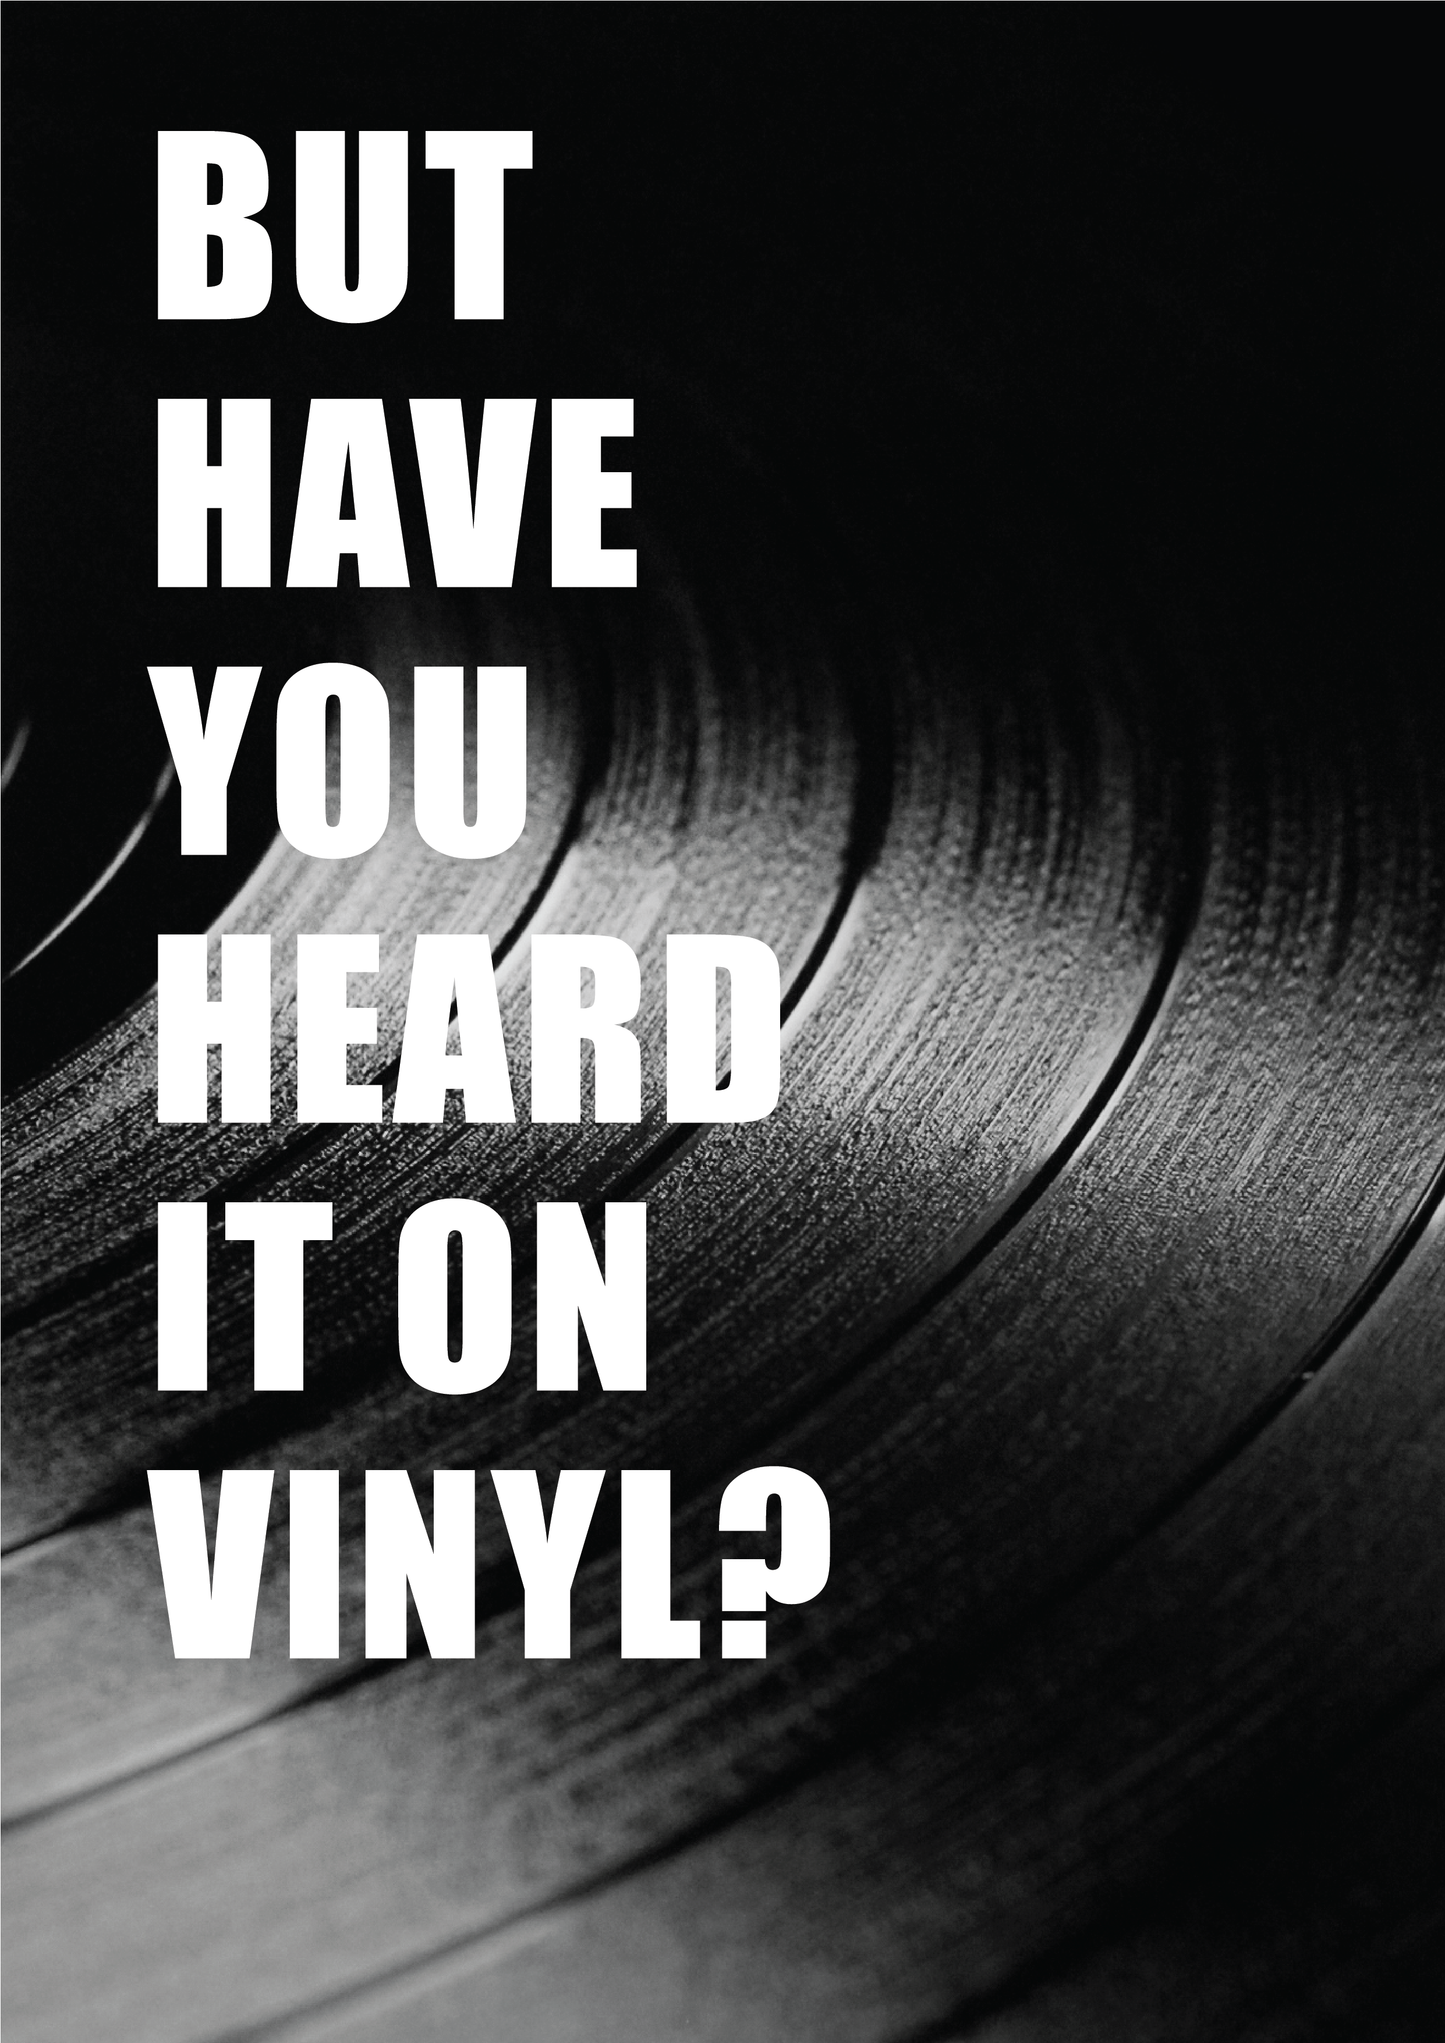 BUT HAVE YOU HEARD IT ON VINYL - A4